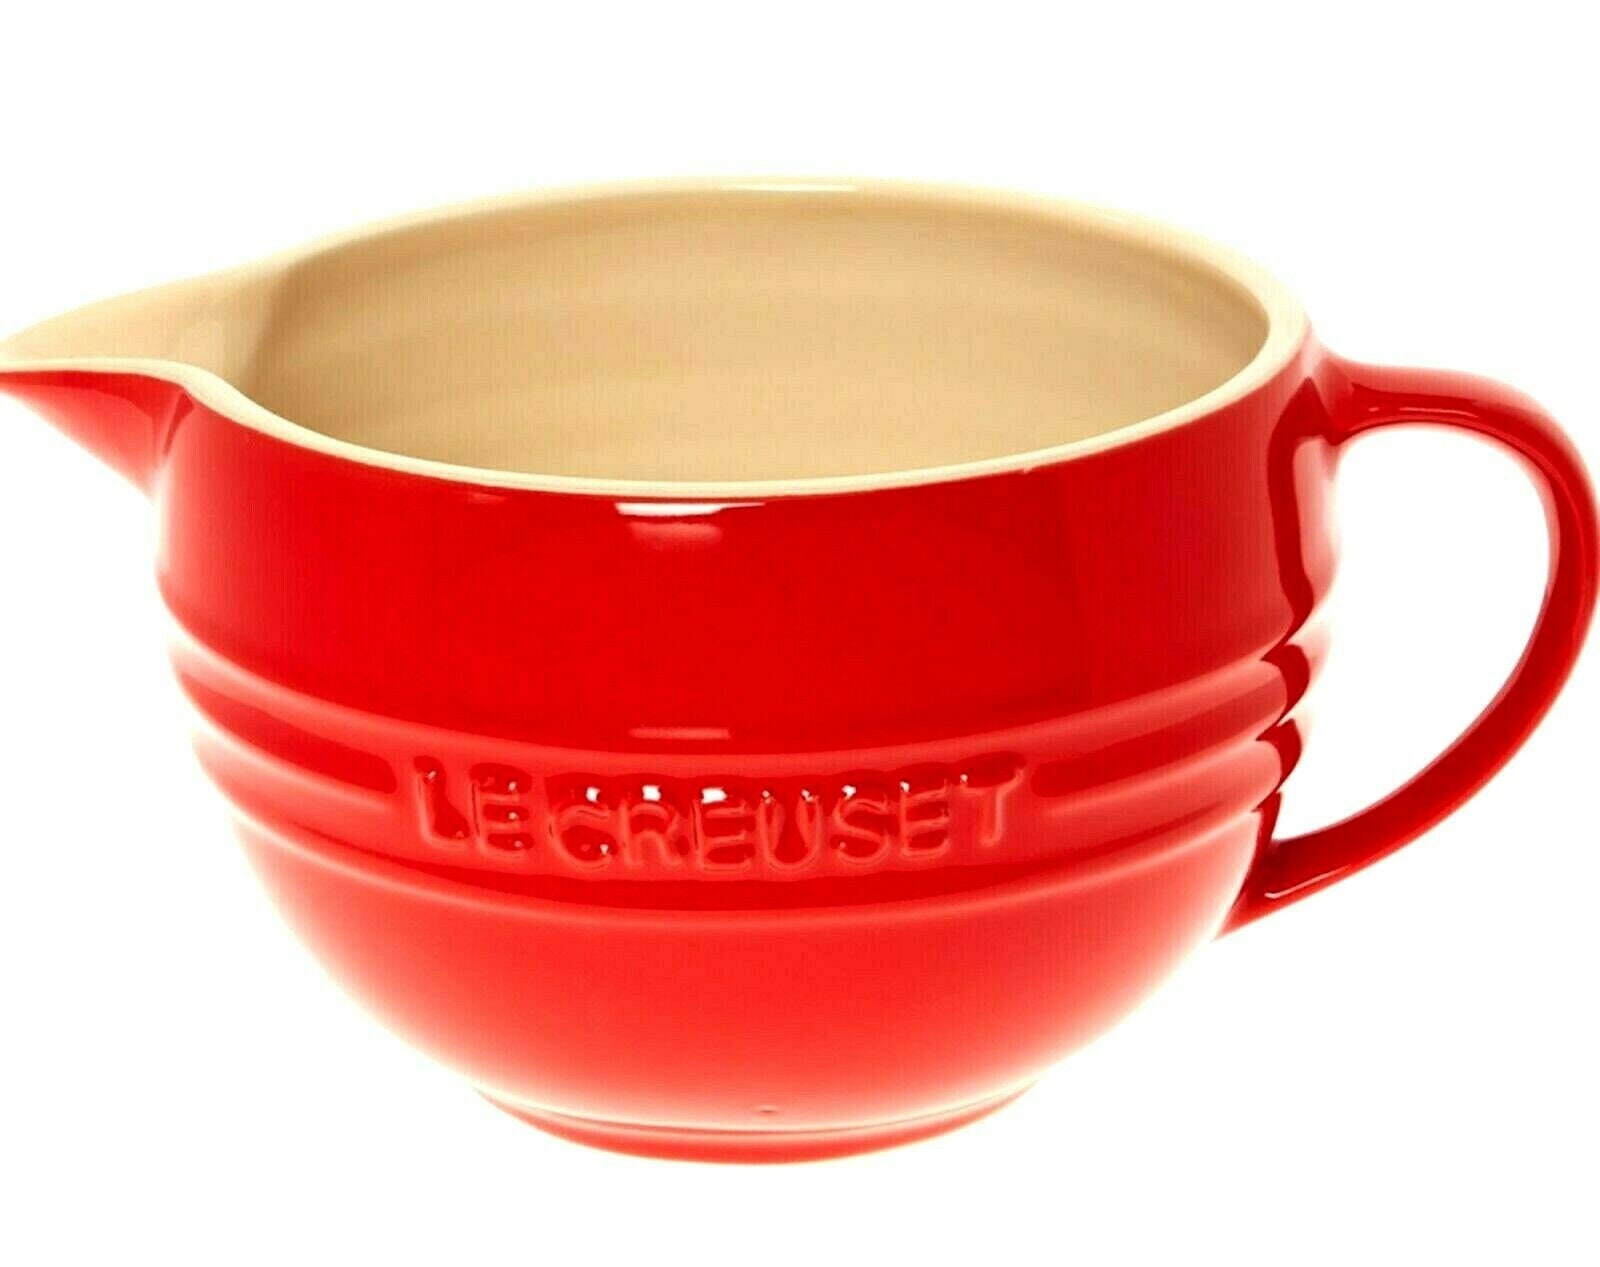 LE CREUSET Stoneware Large Red Mixing Jug 2L New - Etsy